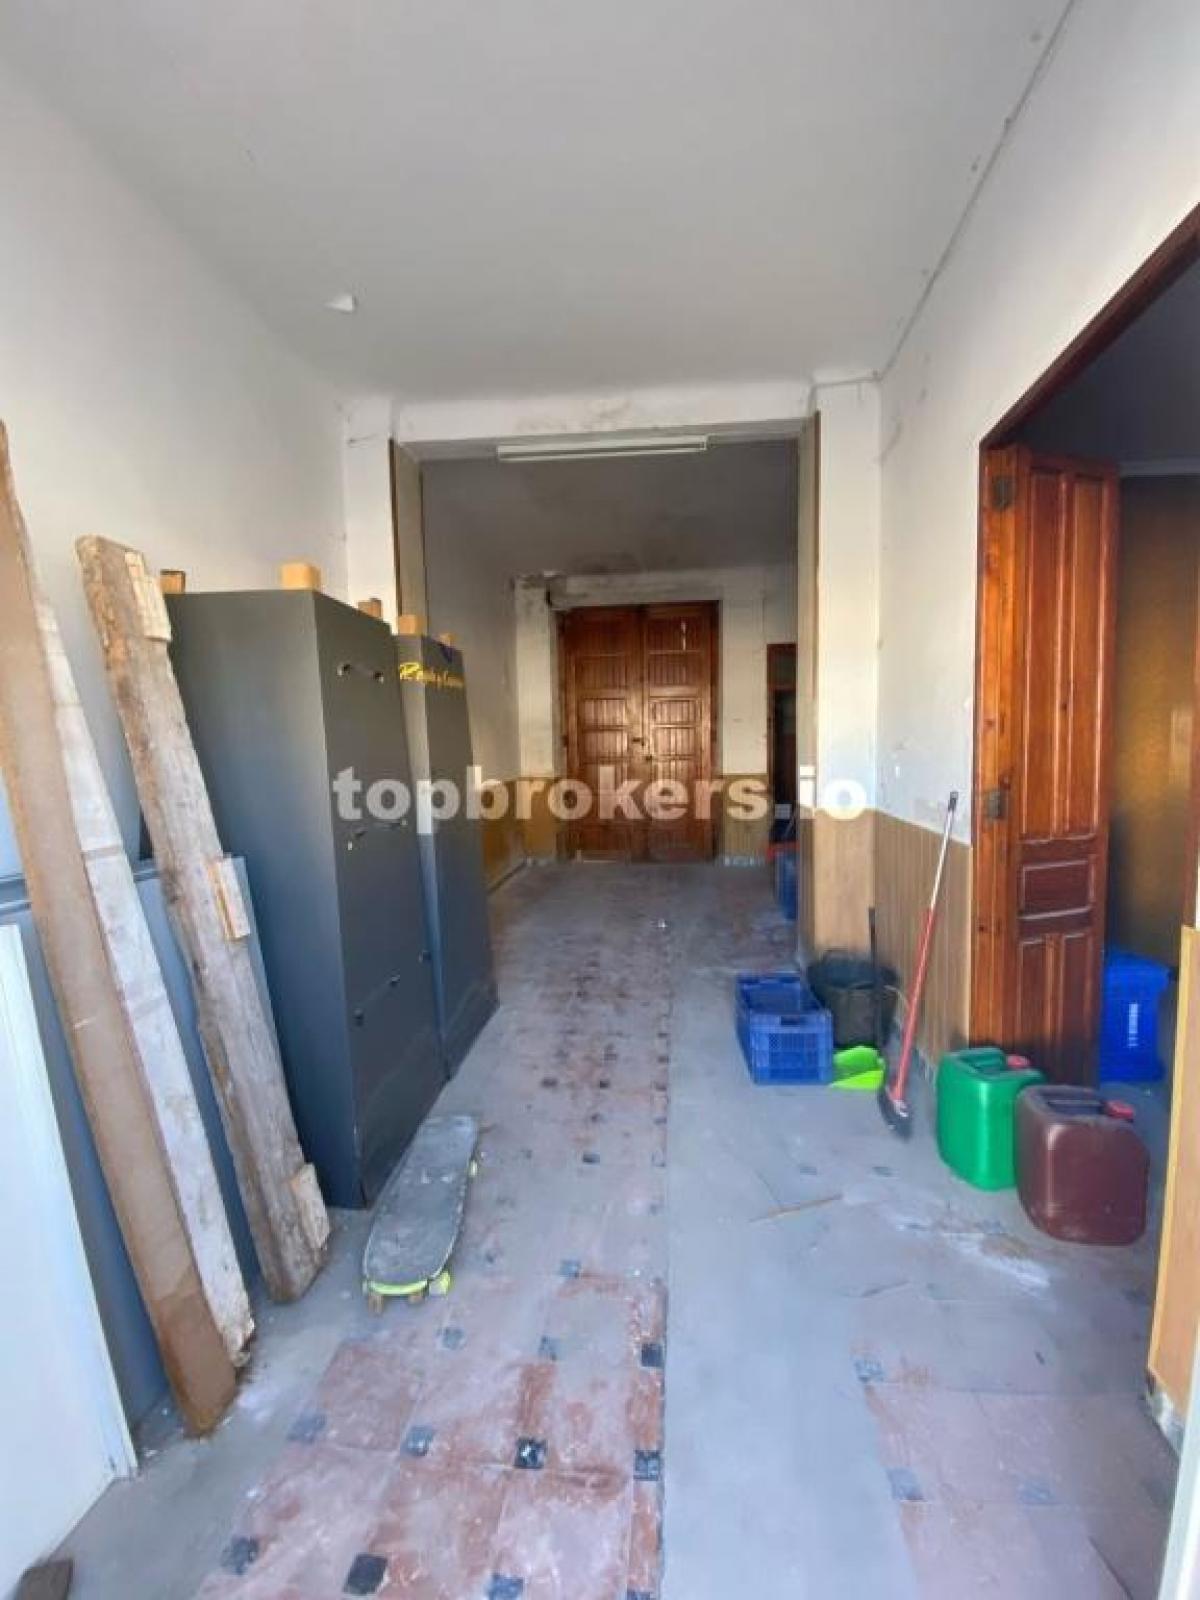 Picture of Home For Sale in Pego, Alicante, Spain